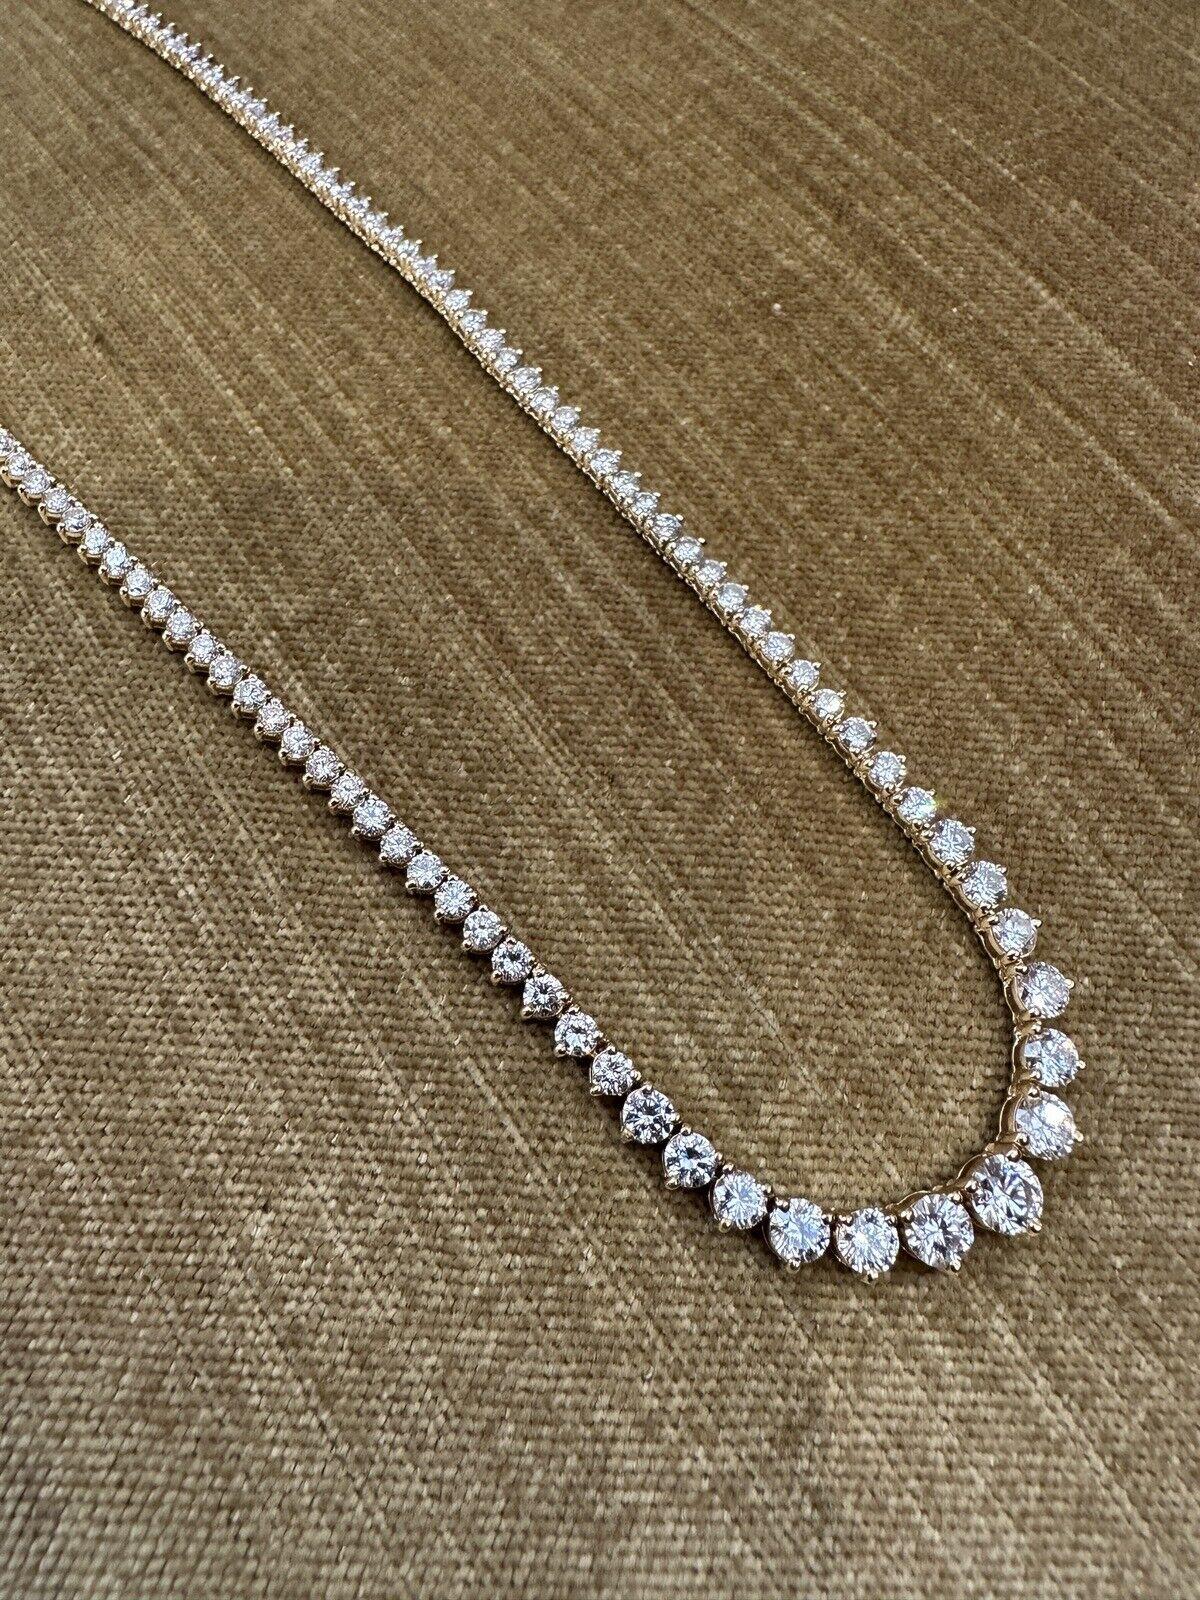 Graduated Diamond Tennis Necklace 11.64 Carats Total Weight in 18k Yellow Gold

Round Diamond Tennis Necklace features 140 Round Brilliant Diamonds 3-prong set in 18k Yellow Gold. 
Diamonds are graduated in sizes.

Total diamond weight is 11.64